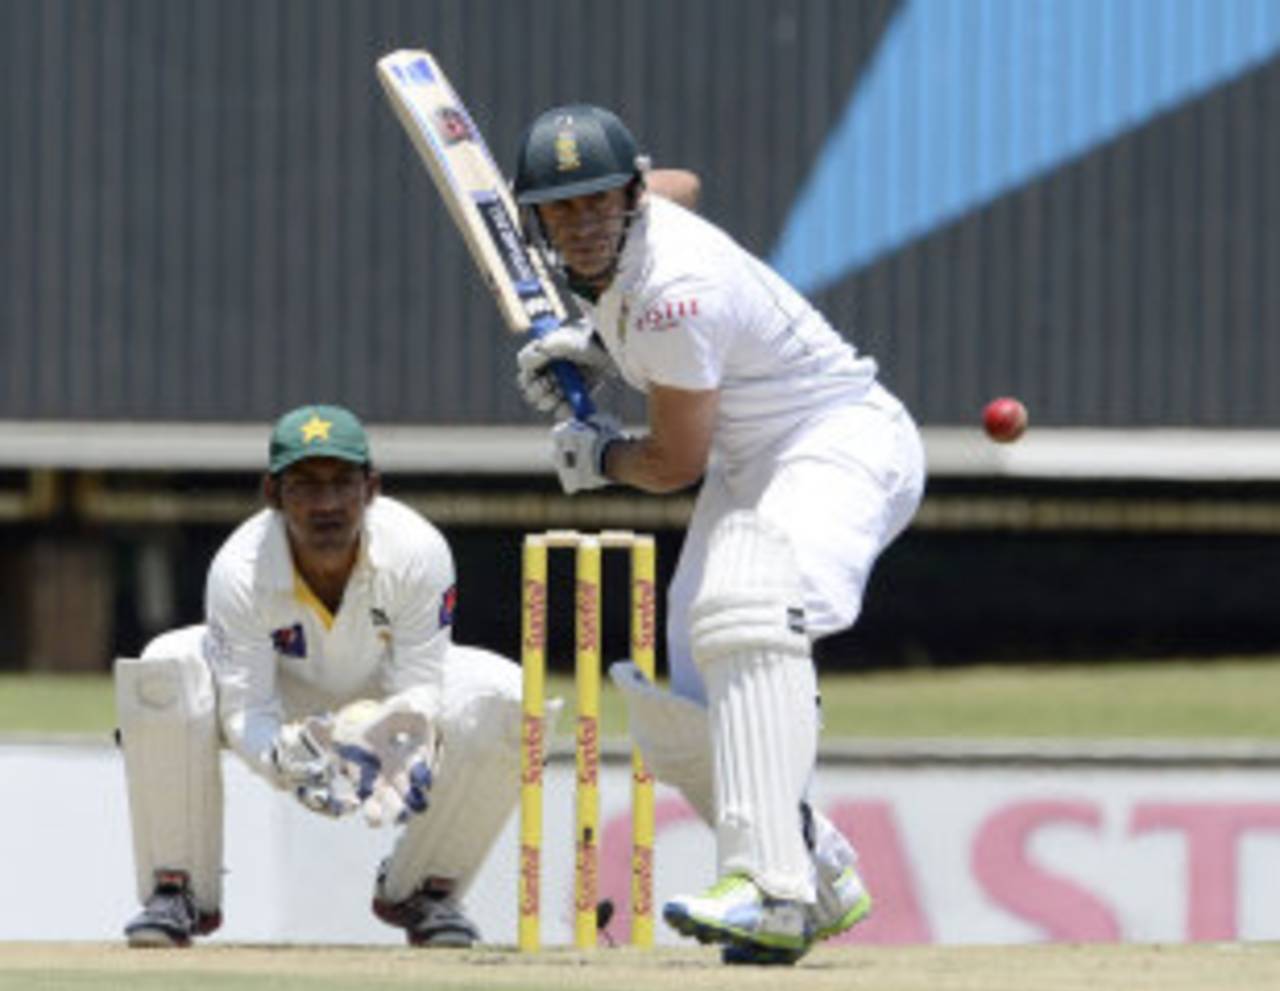 Faf du Plessis gets in position to play a shot, South Africa v Pakistan, 3rd Test, Centurion, 1st day, February 22, 2013